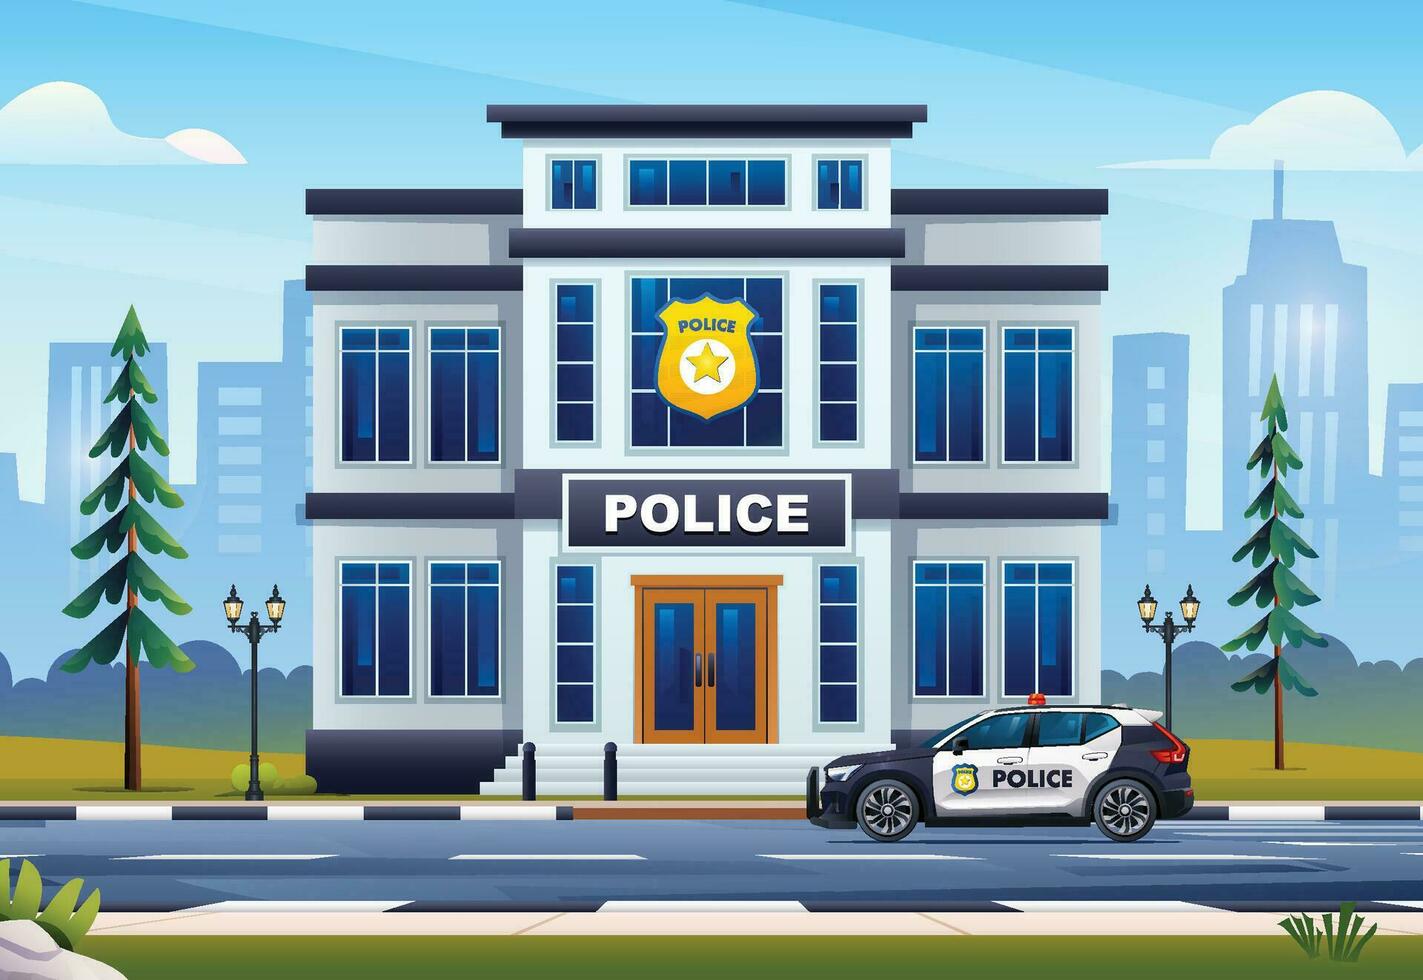 Police station building with patrol car and city landscape. Vector cartoon illustration